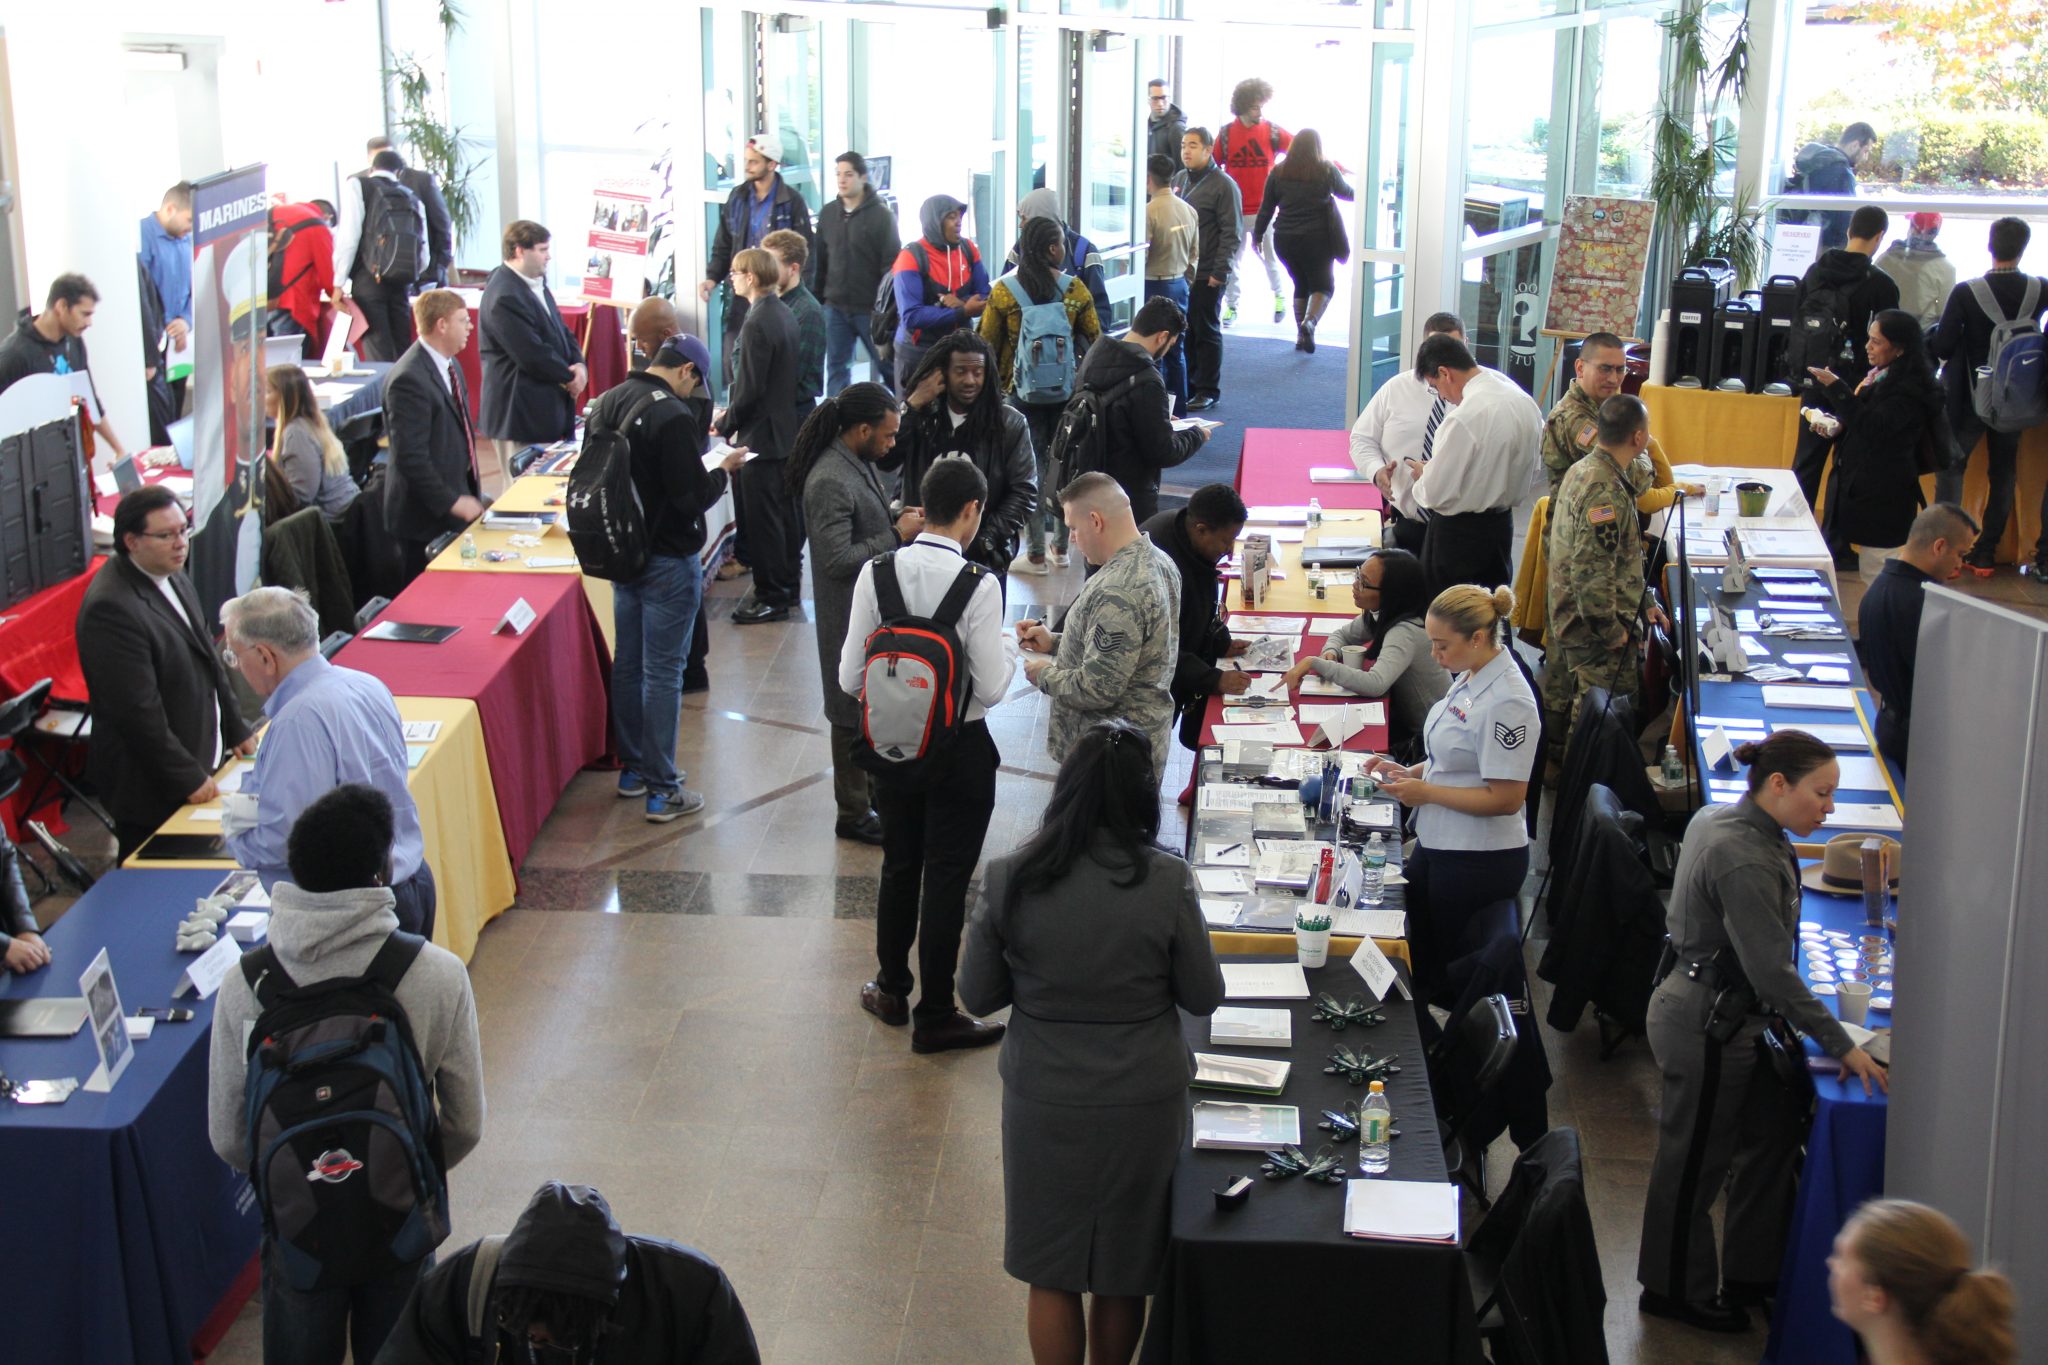 Fall Internship Fair Gives Active Recruitment Opportunities to Students